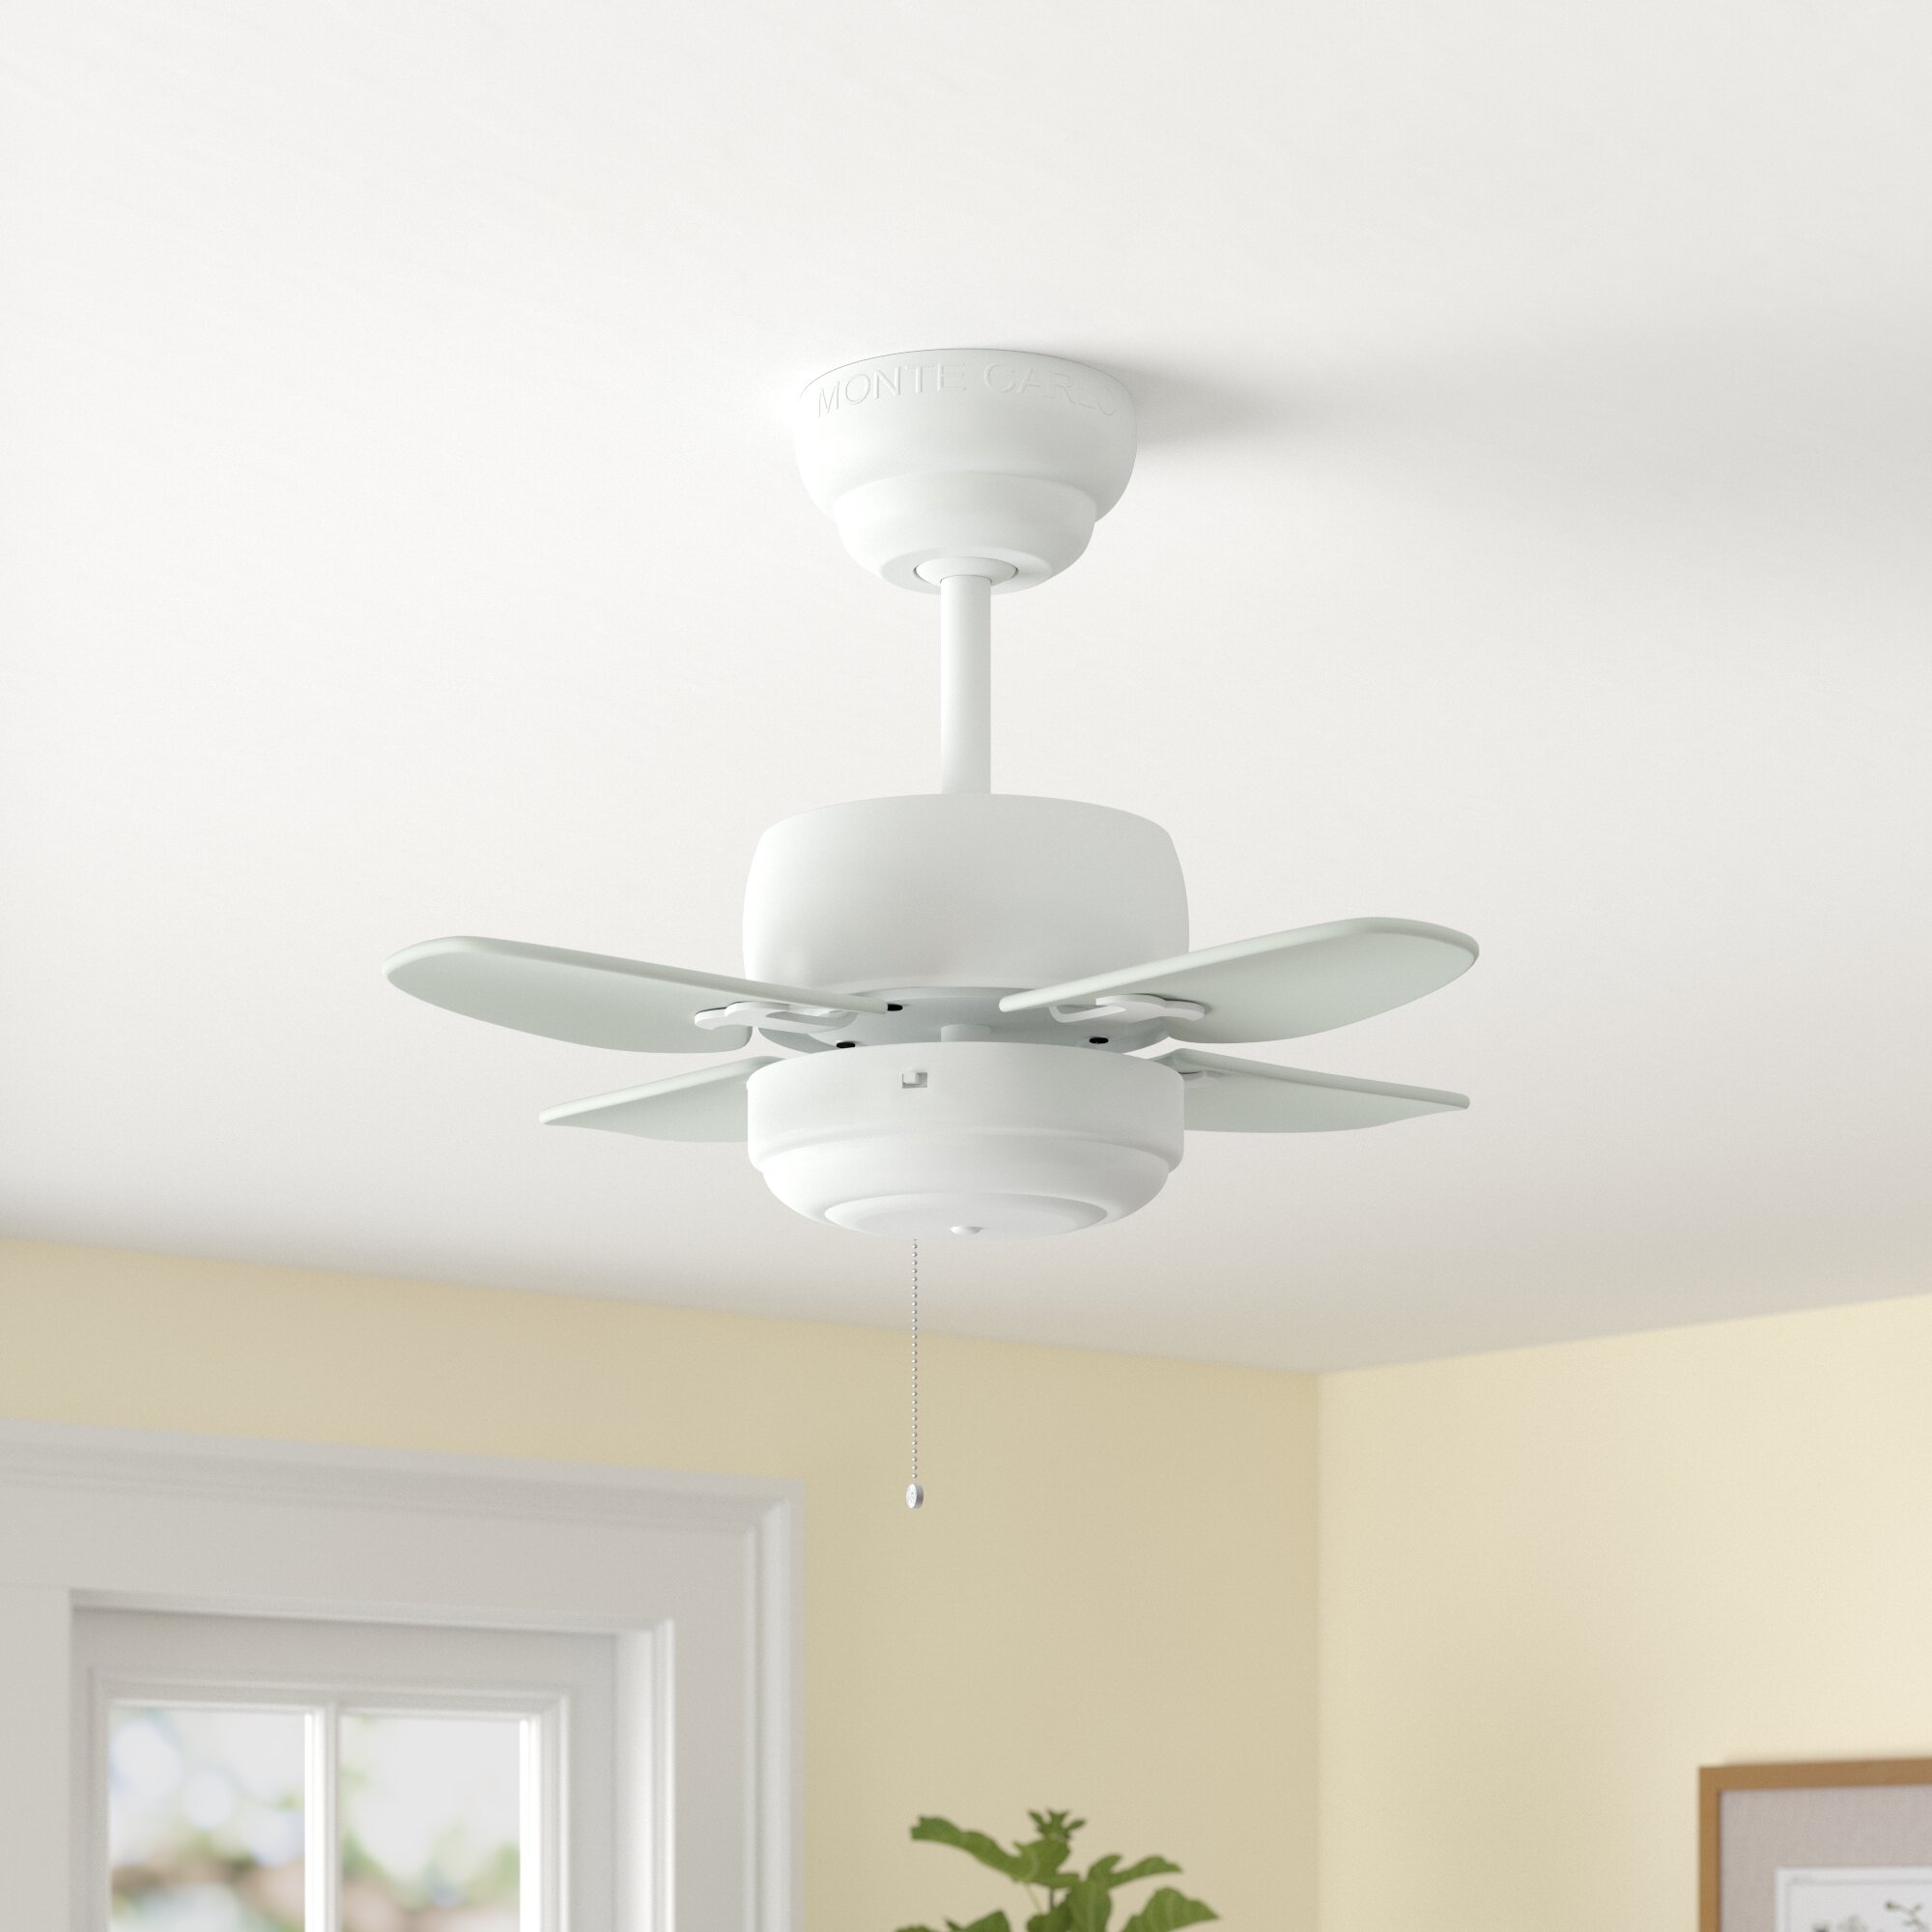 Darby Home Co 20 Hemsworth 4 Blade Ceiling Fan Reviews